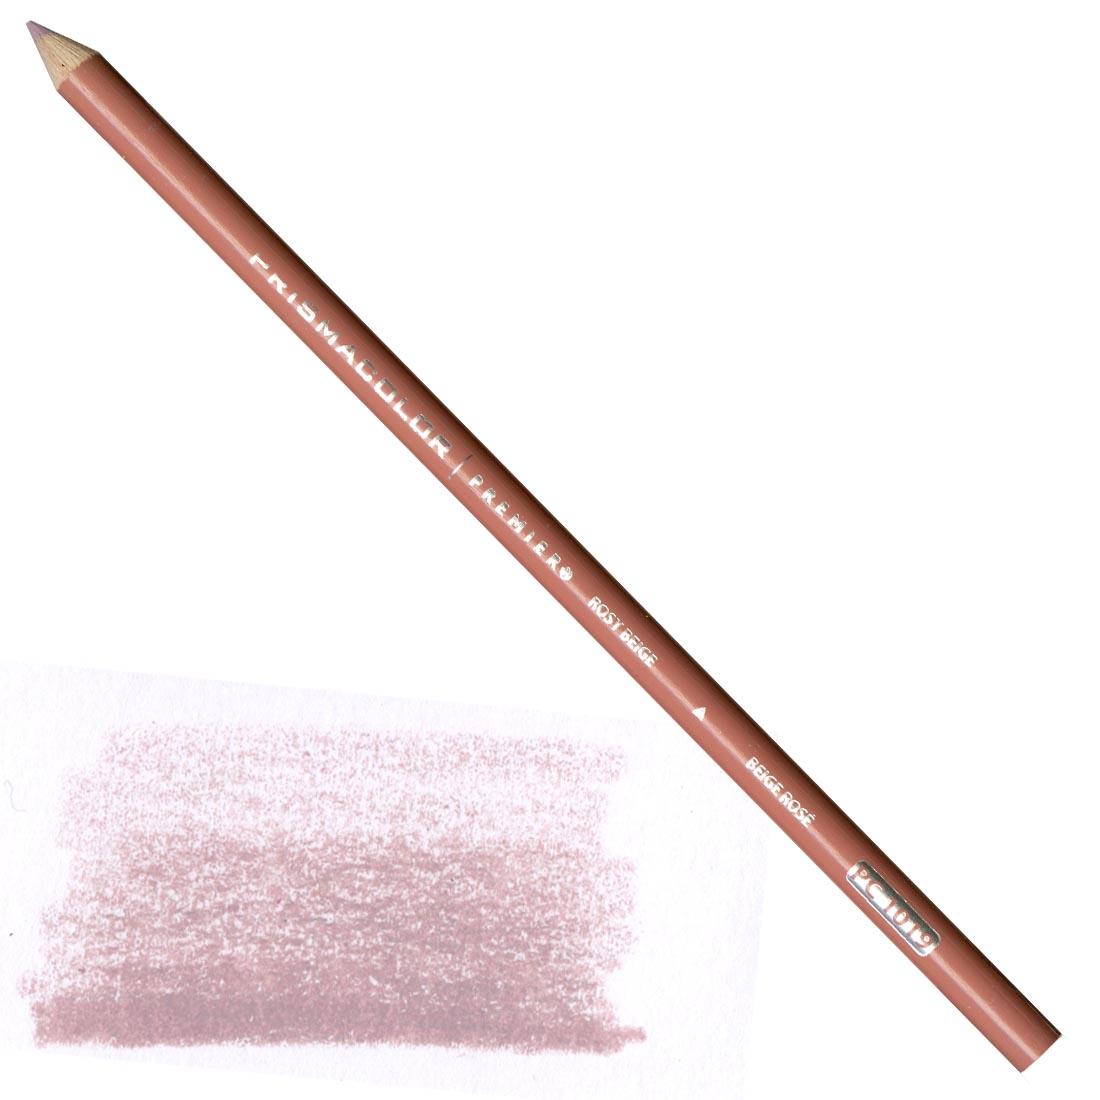 Rosy Beige Prismacolor Premier Colored Pencil with a sample colored swatch